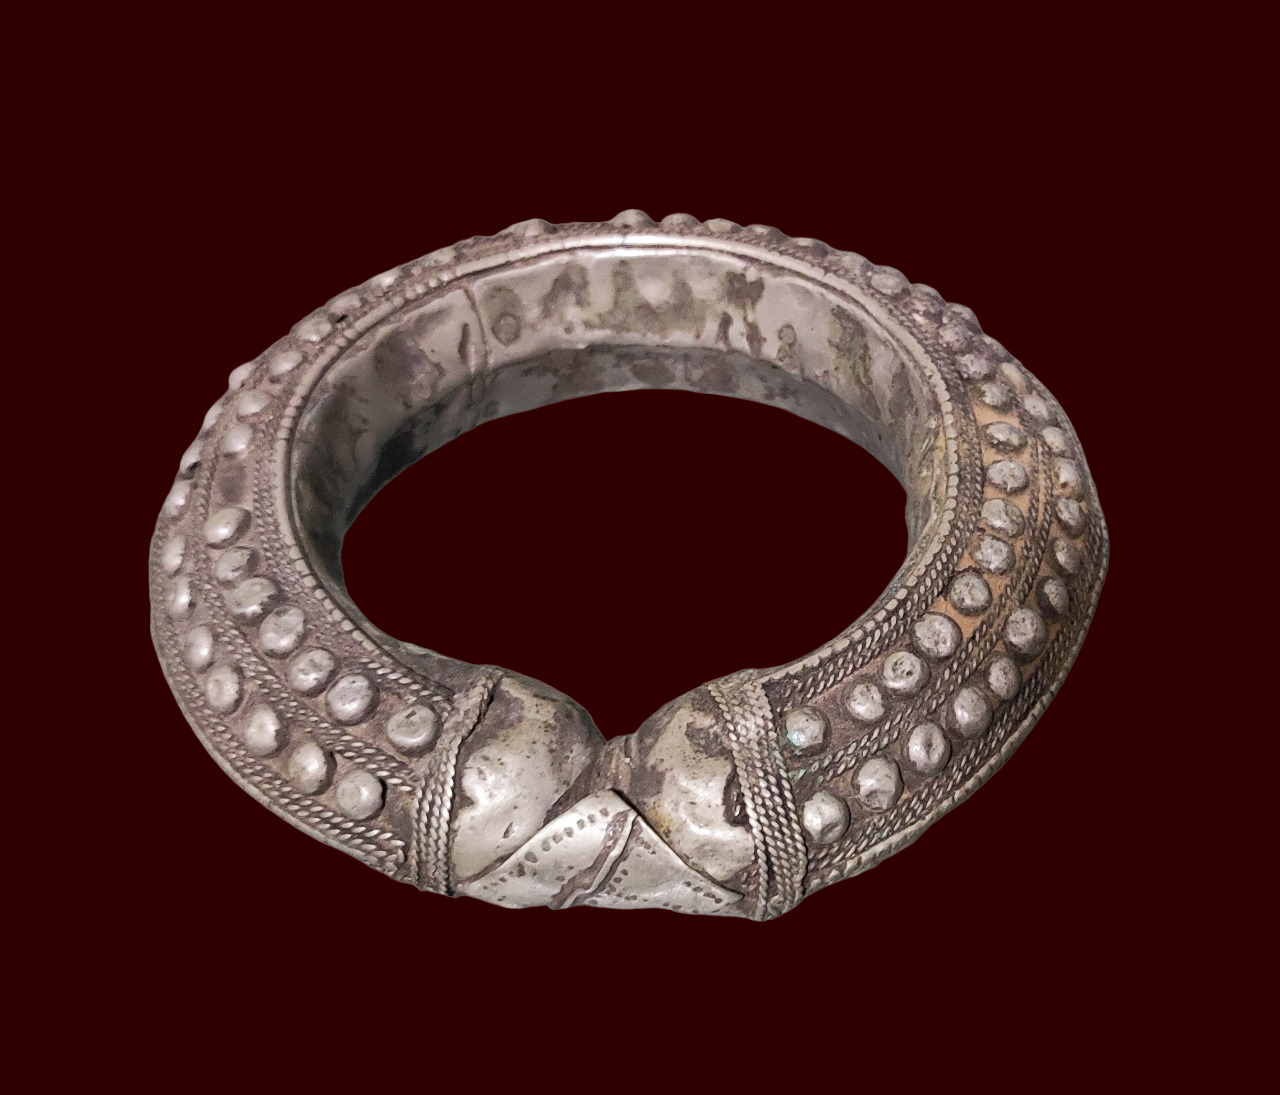 Antique Jewelry - A Thick and Hollow Low Silver Tribal Yemeni Bedouin Bracelet